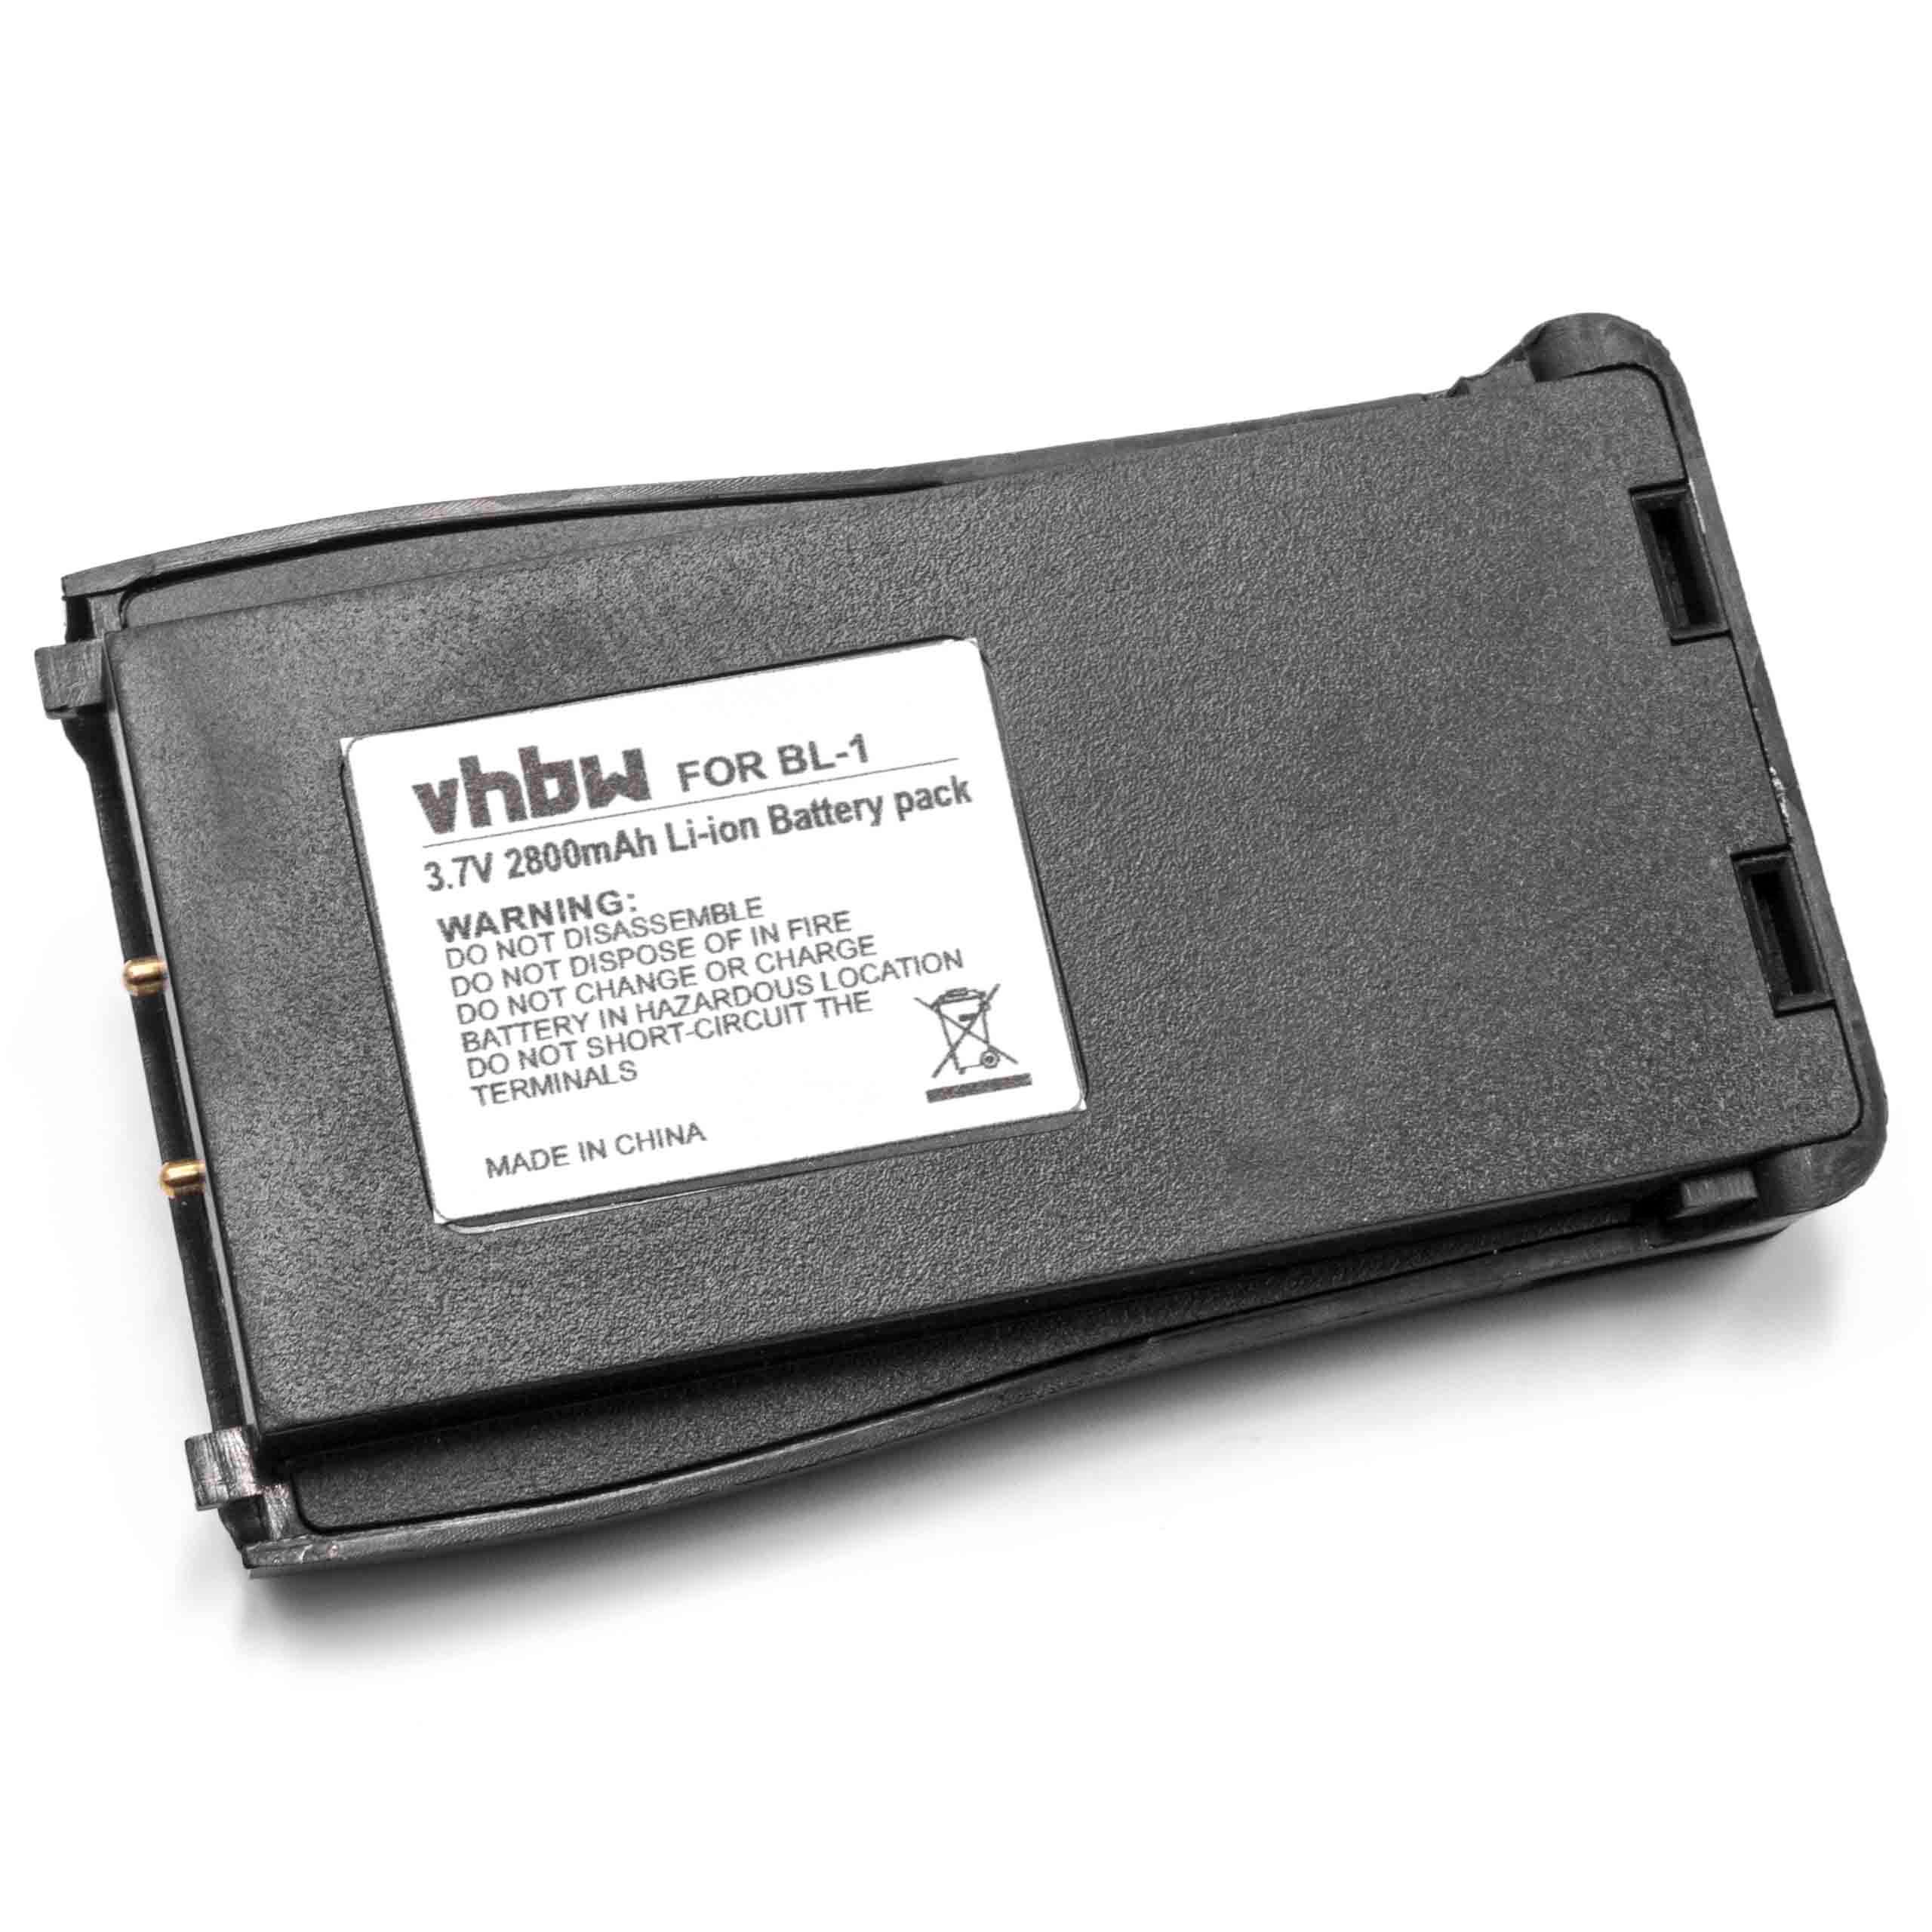 Radio Battery Replacement for Baofeng BL-1 - 2800mAh 3.7V Li-Ion